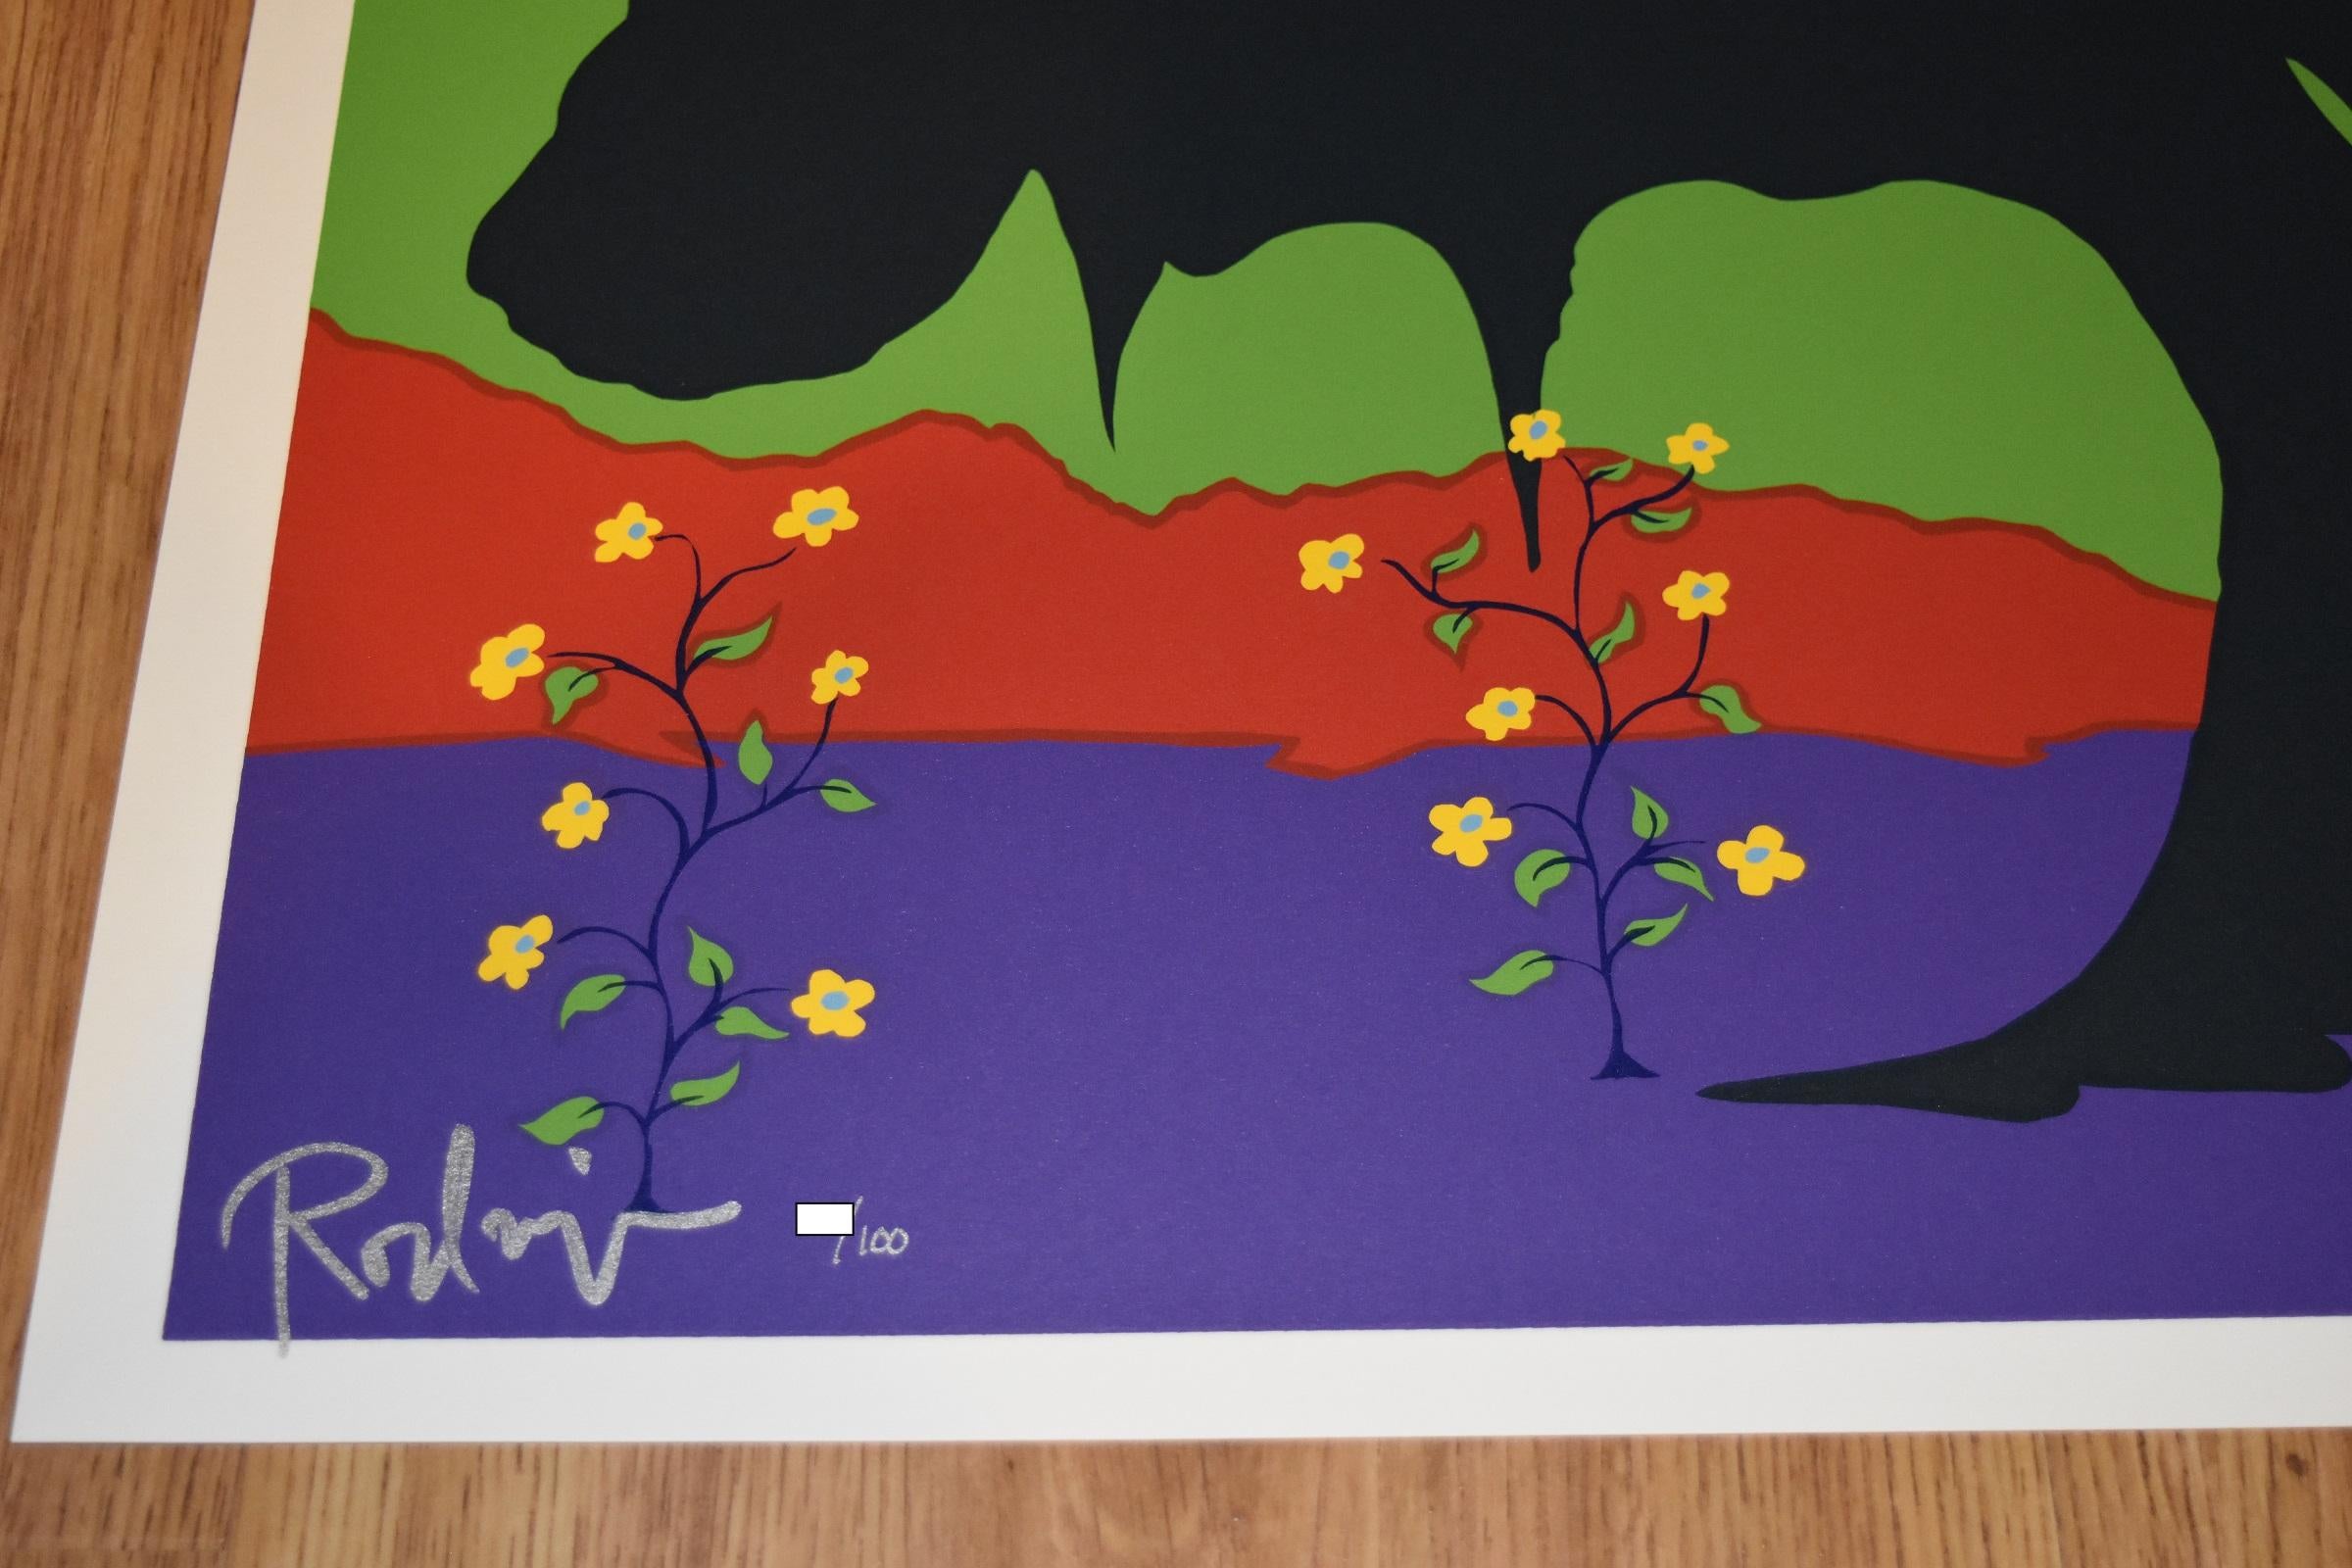 This Blue Dog work consists of 5 blue dog heads nestled in the leafy section of a black tree.  The background is green, red and purple with 4 flower sprigs.  The dogs all have soulful yellow eyes.  This pop art animal original silkscreen print on